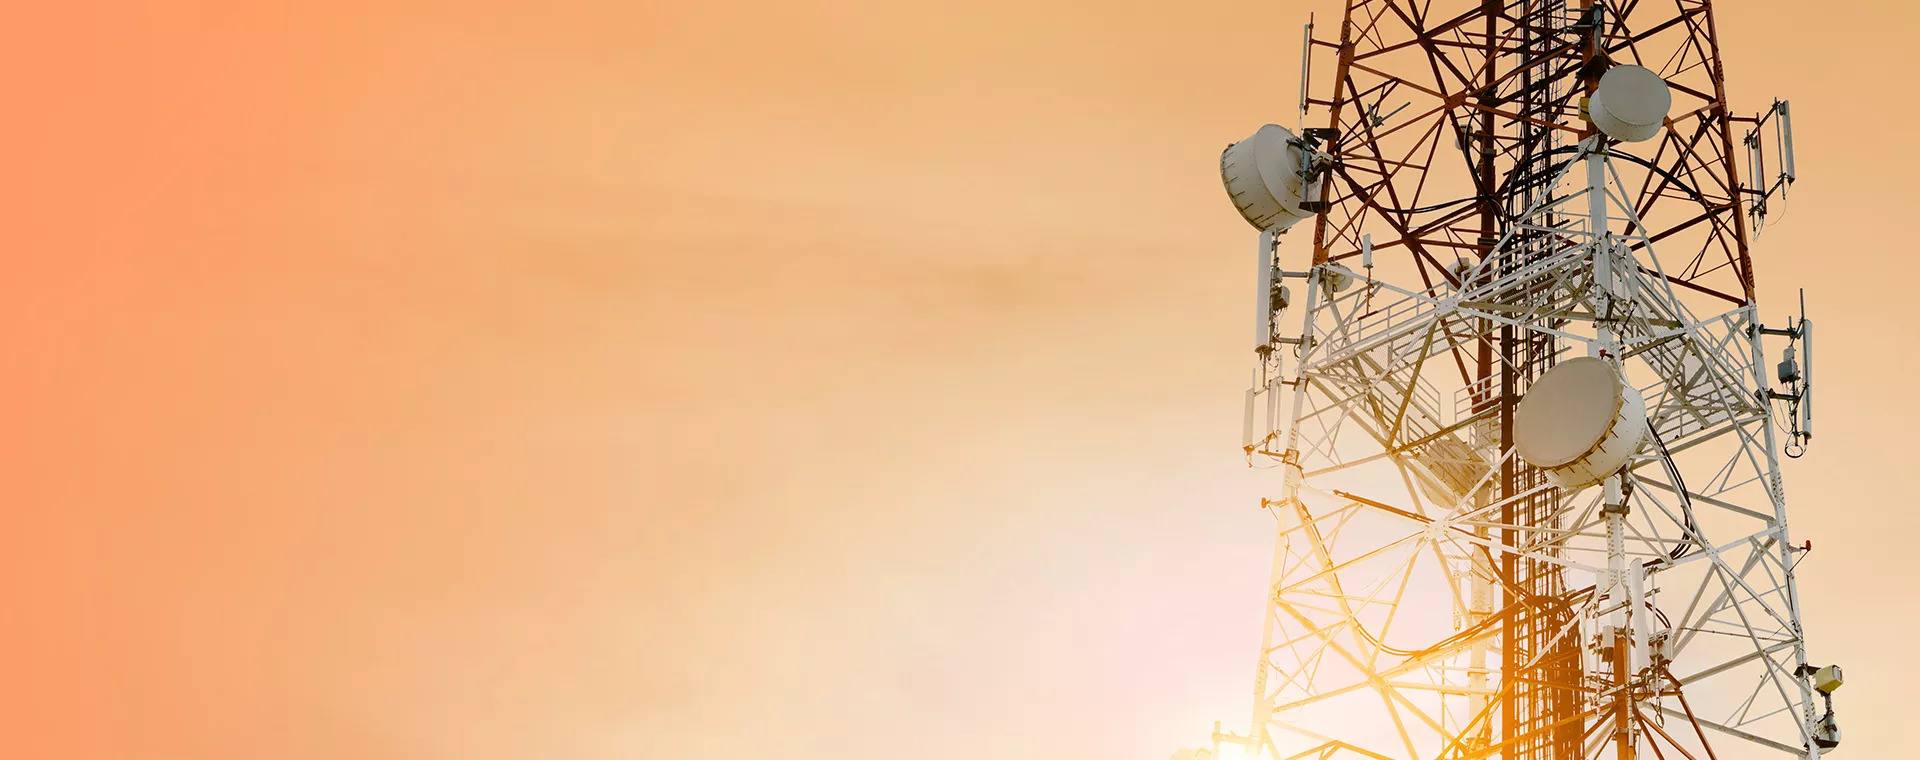 Communication technology network tower in very hot environment